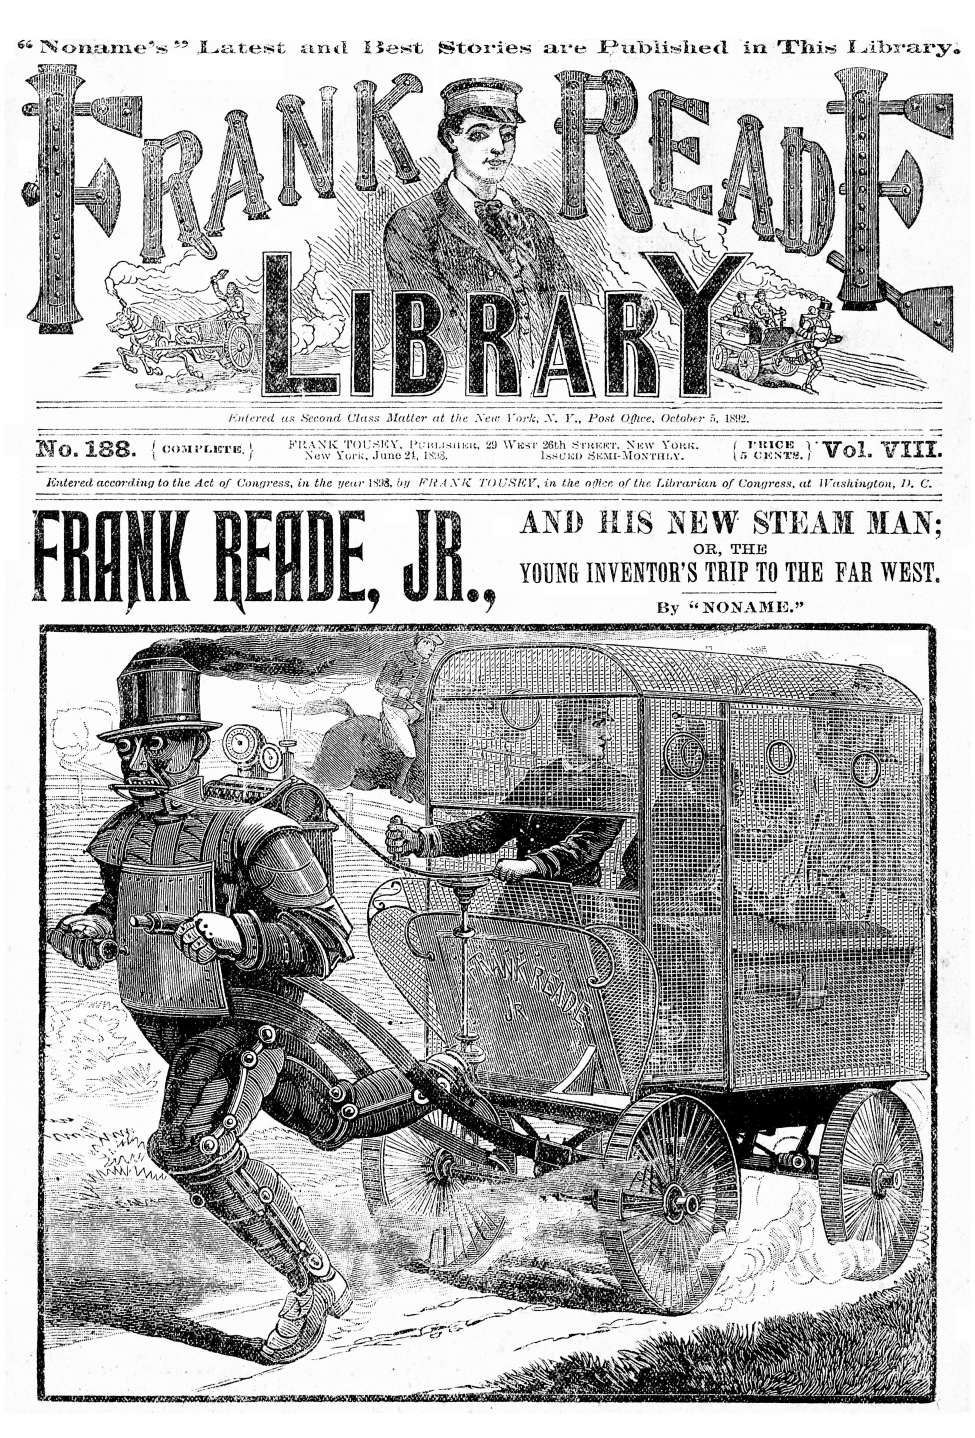 Comic Book Cover For v08 188 - Frank Reade Jr. and His New Steam Man